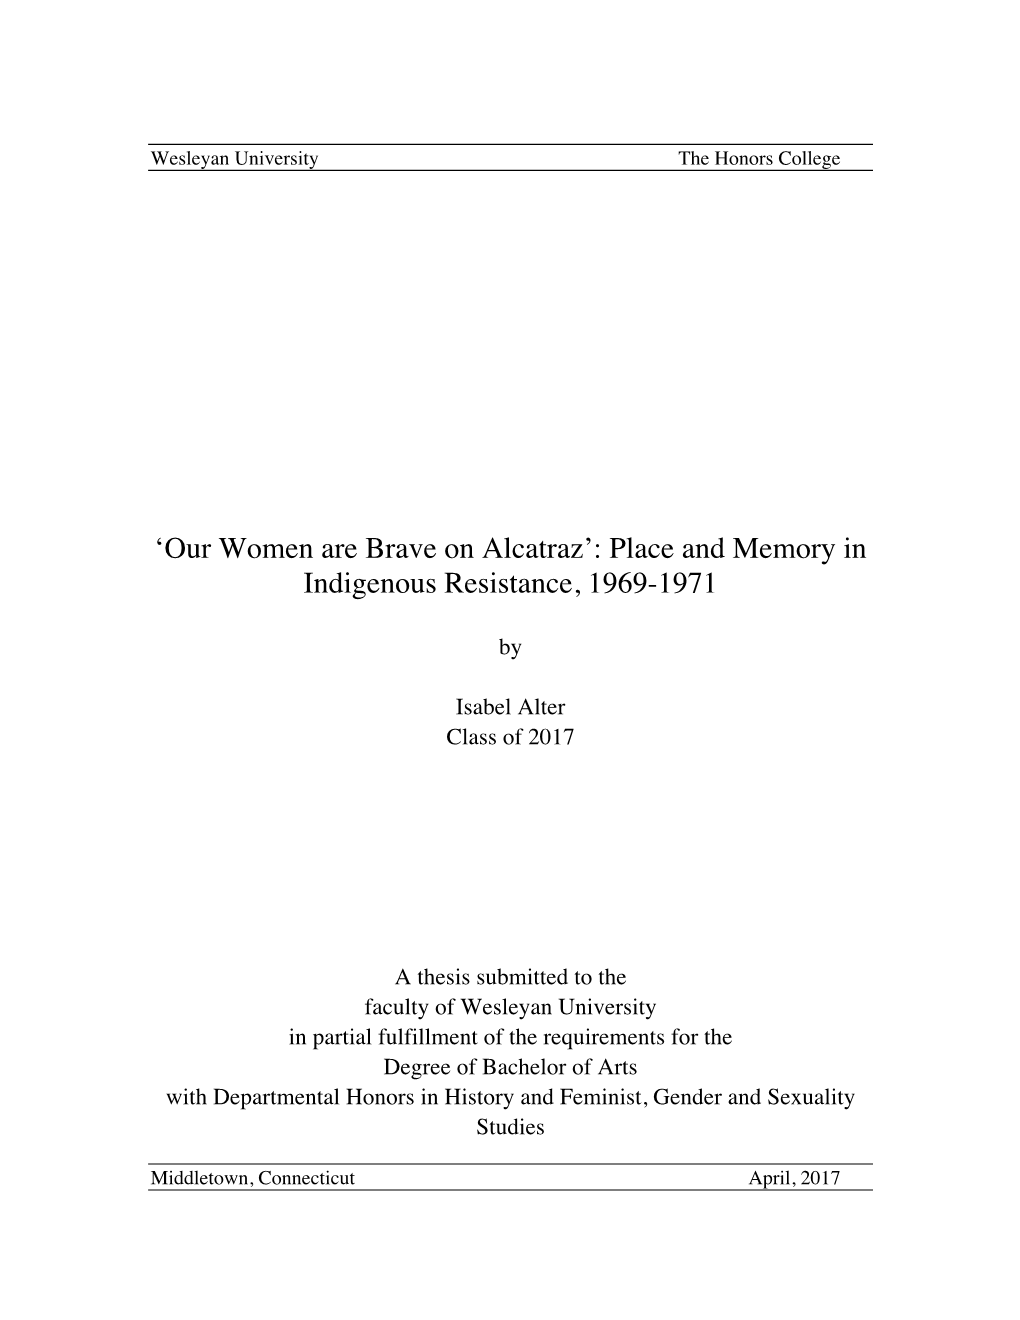 Place and Memory in Indigenous Resistance, 1969-1971